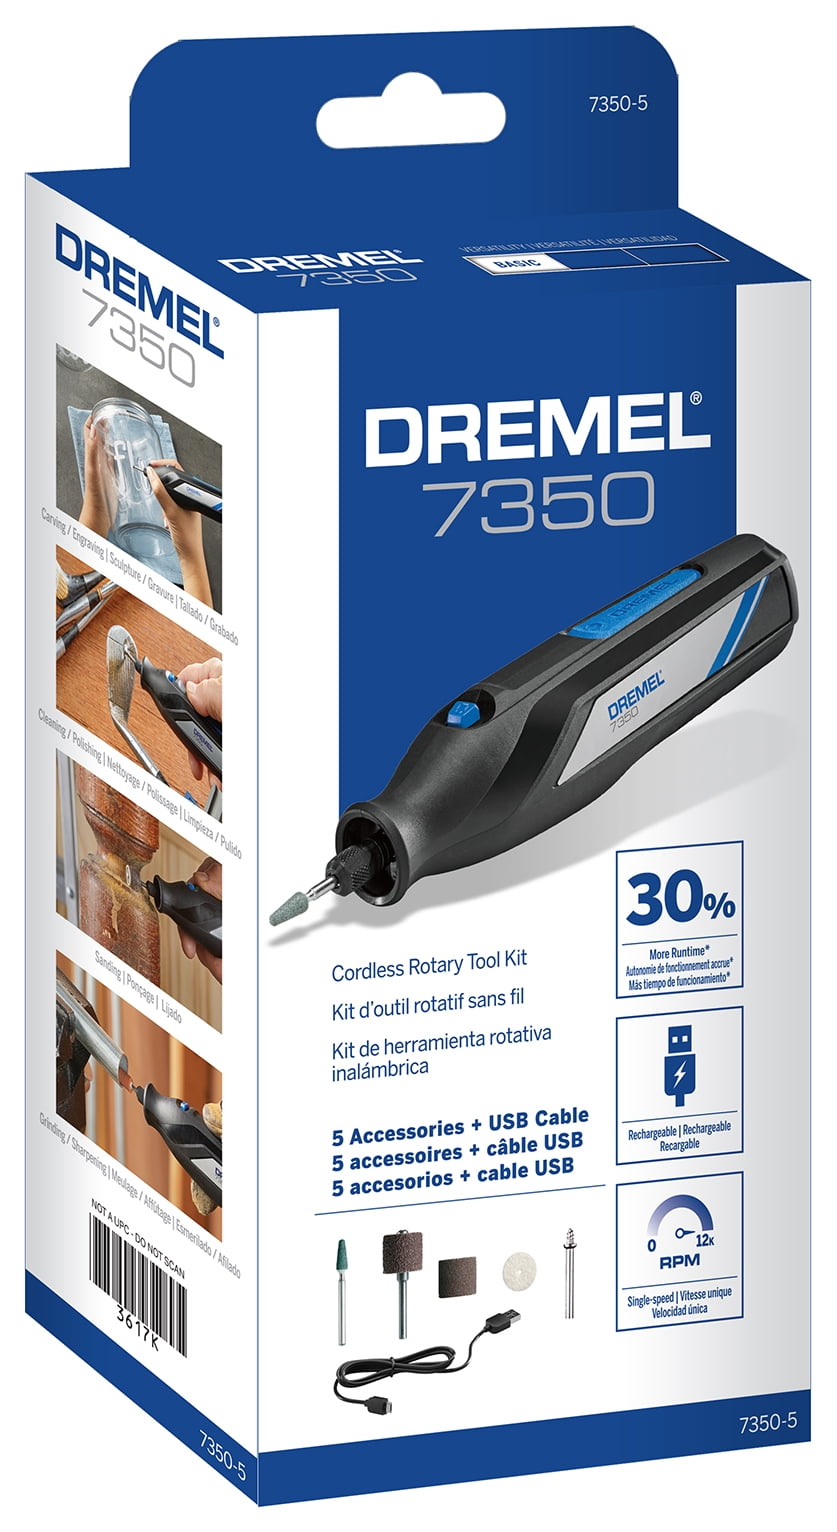 Dremel 7350-5 Cordless Rotary Tool Kit, Includes 4V Li-ion Battery and 7  Rotary Tool Accessories - Ideal for Light DIY Projects and Precision Work 